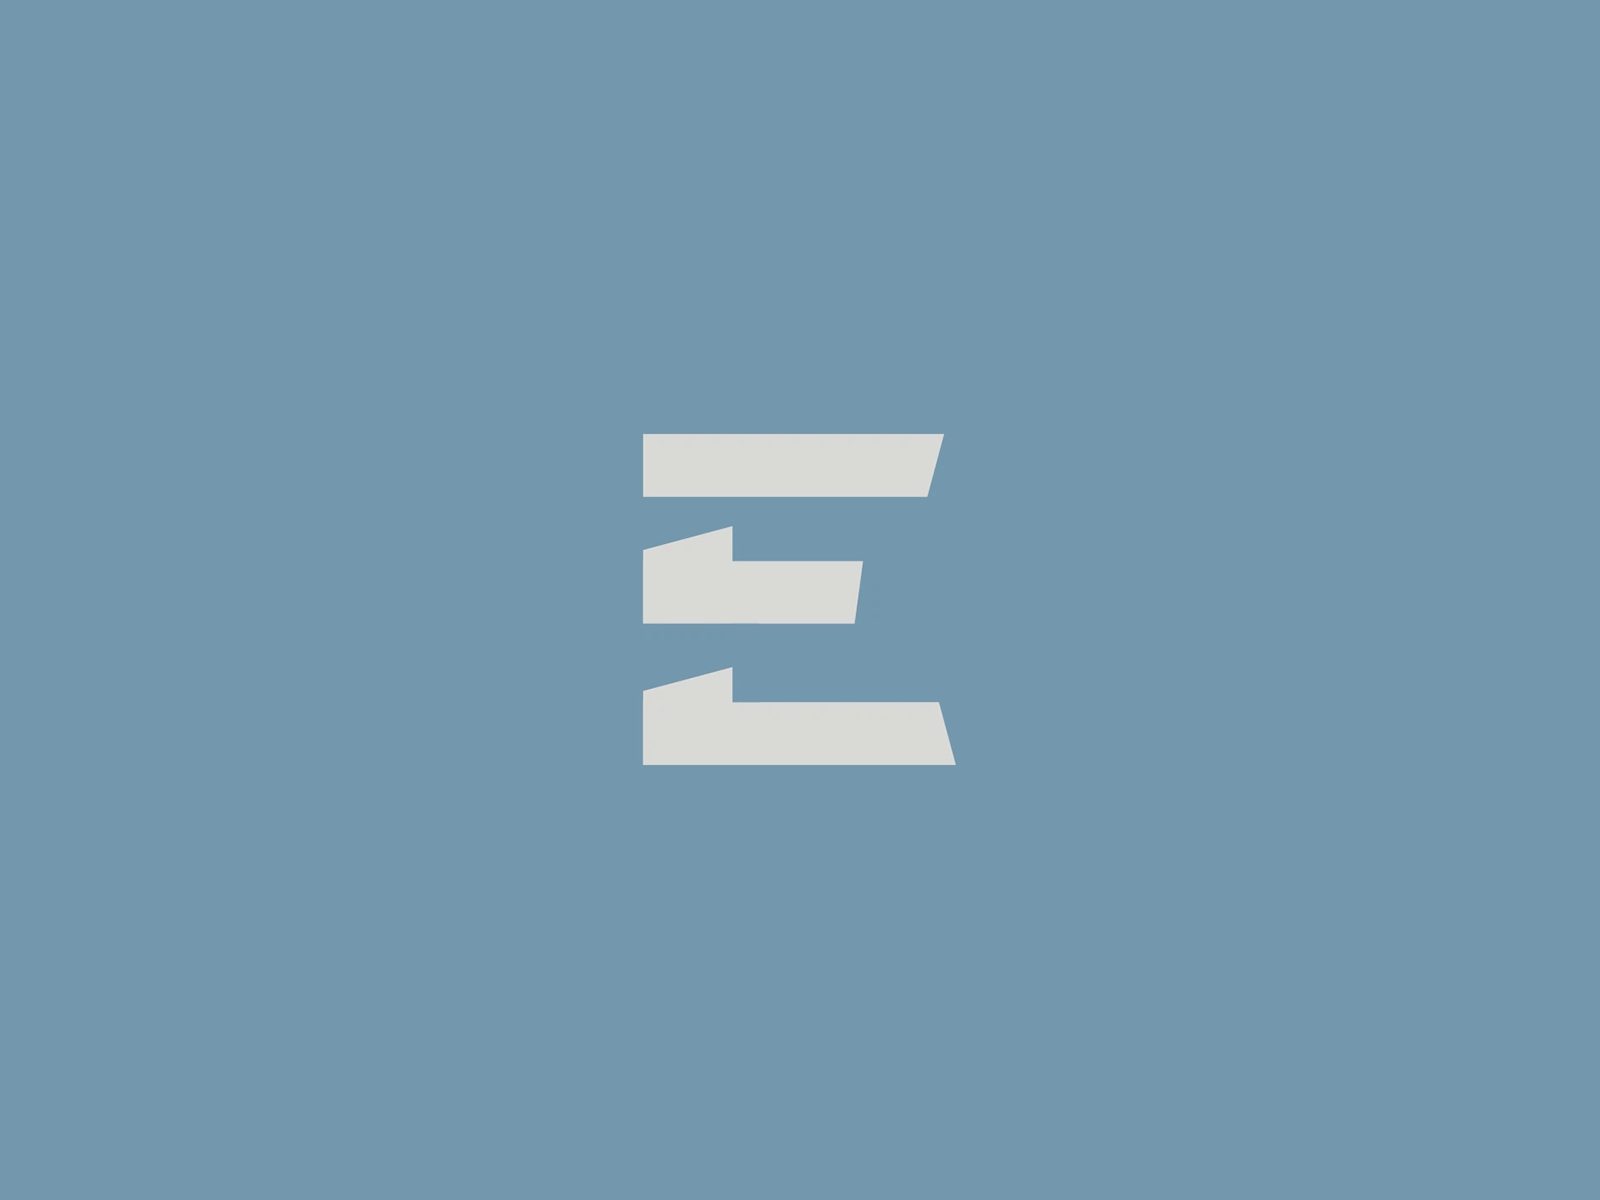 EAST Motion Graphic